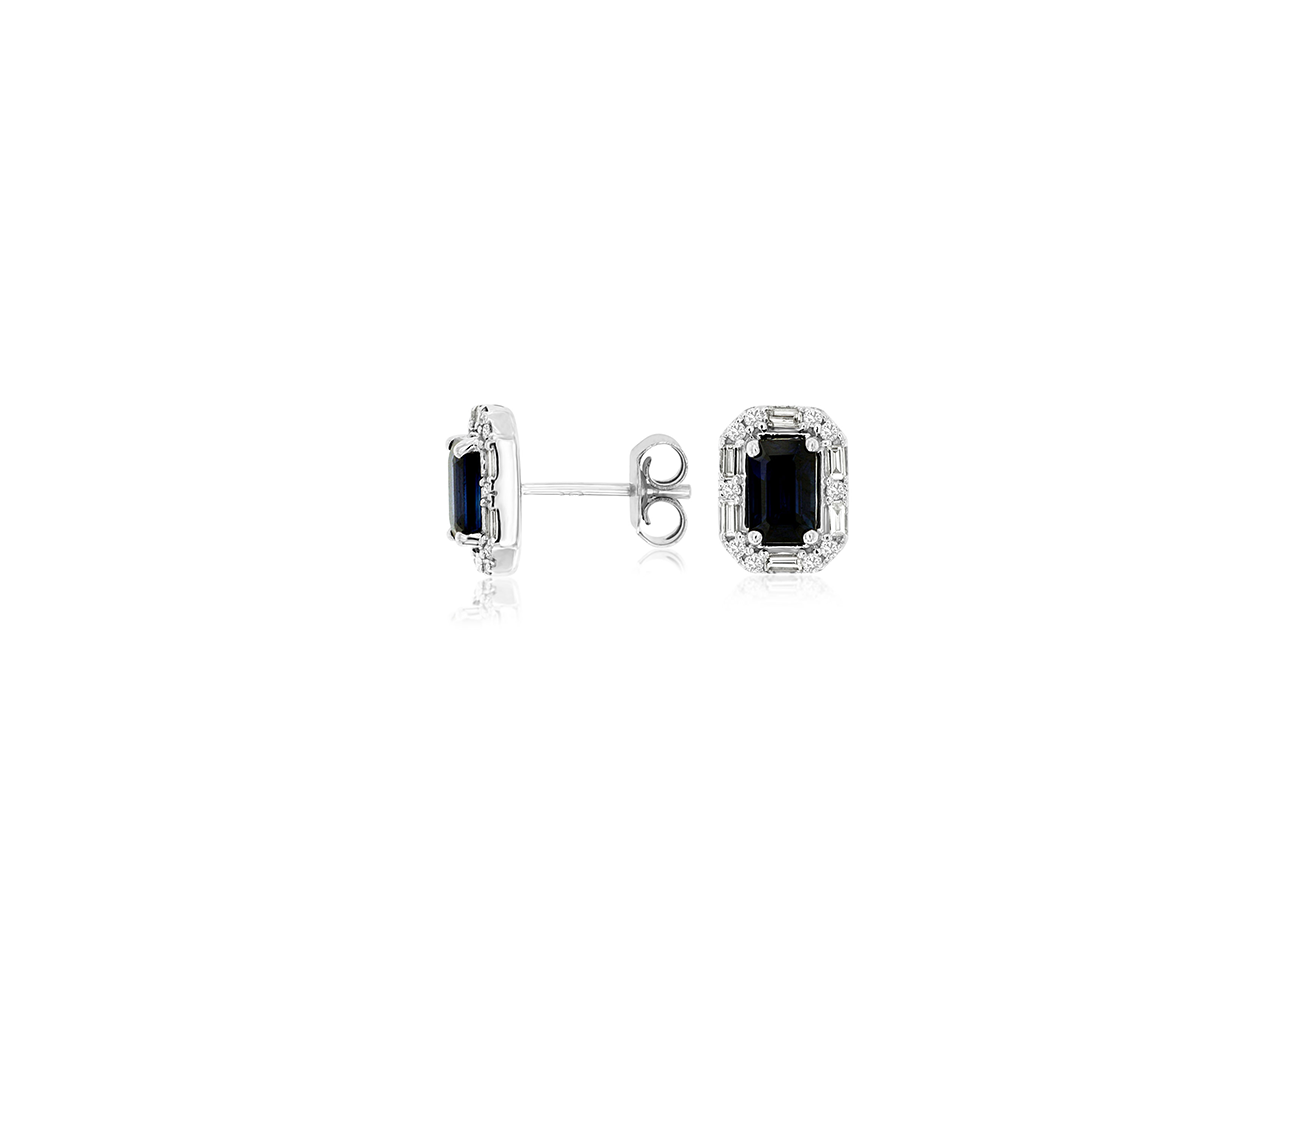 Emerald Cut Sapphire and Diamond Earrings in 14k White Gold